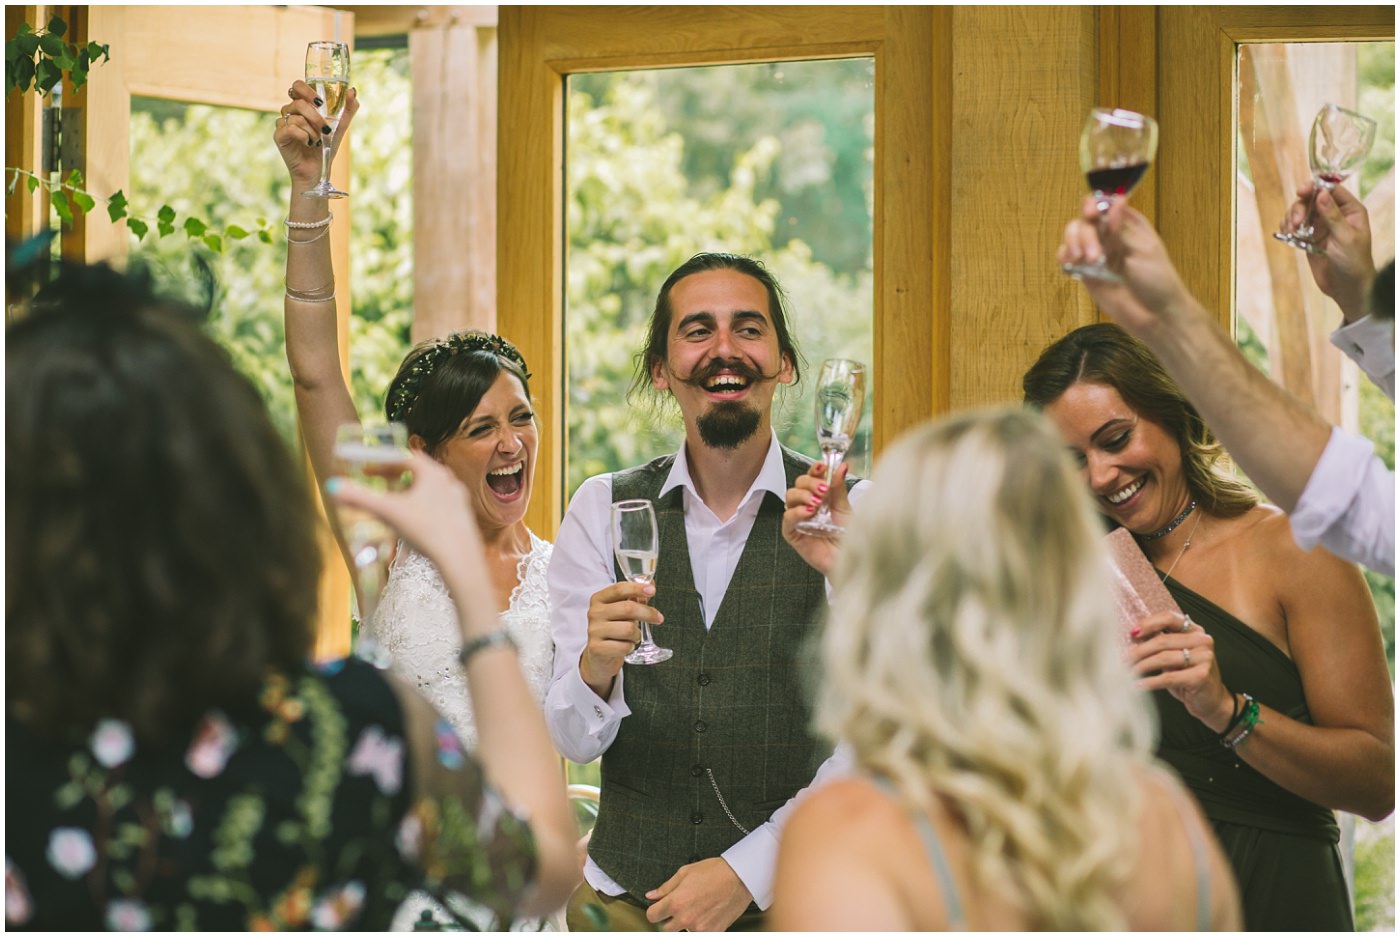 bride and groom raise a glass in toast